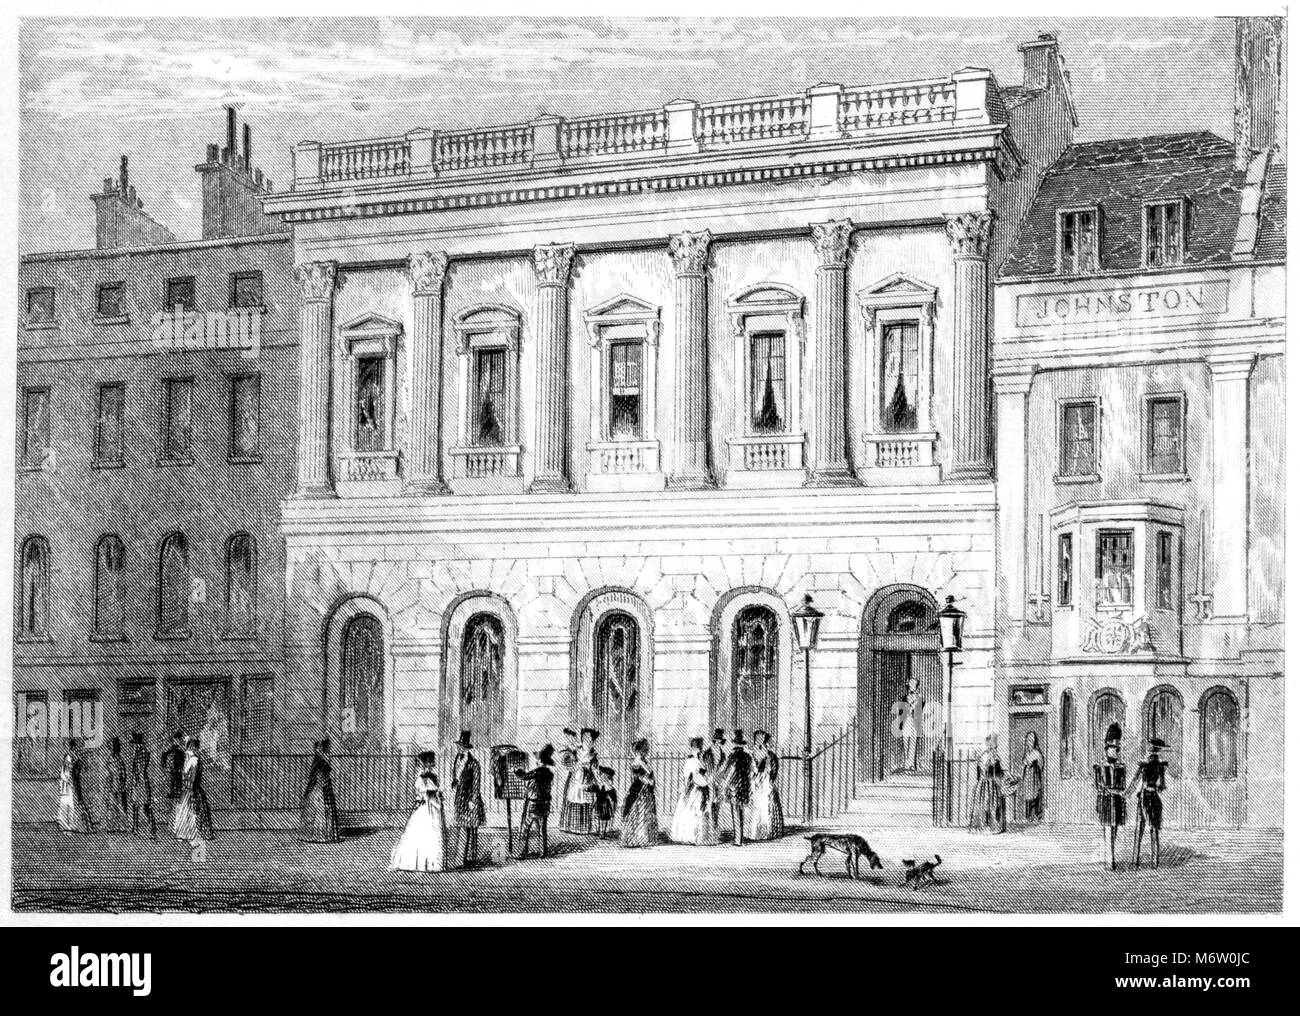 An engraving of Arthurs Club House, St James Street, London scanned at high resolution from a book printed in 1851.  Believed copyright free. Stock Photo